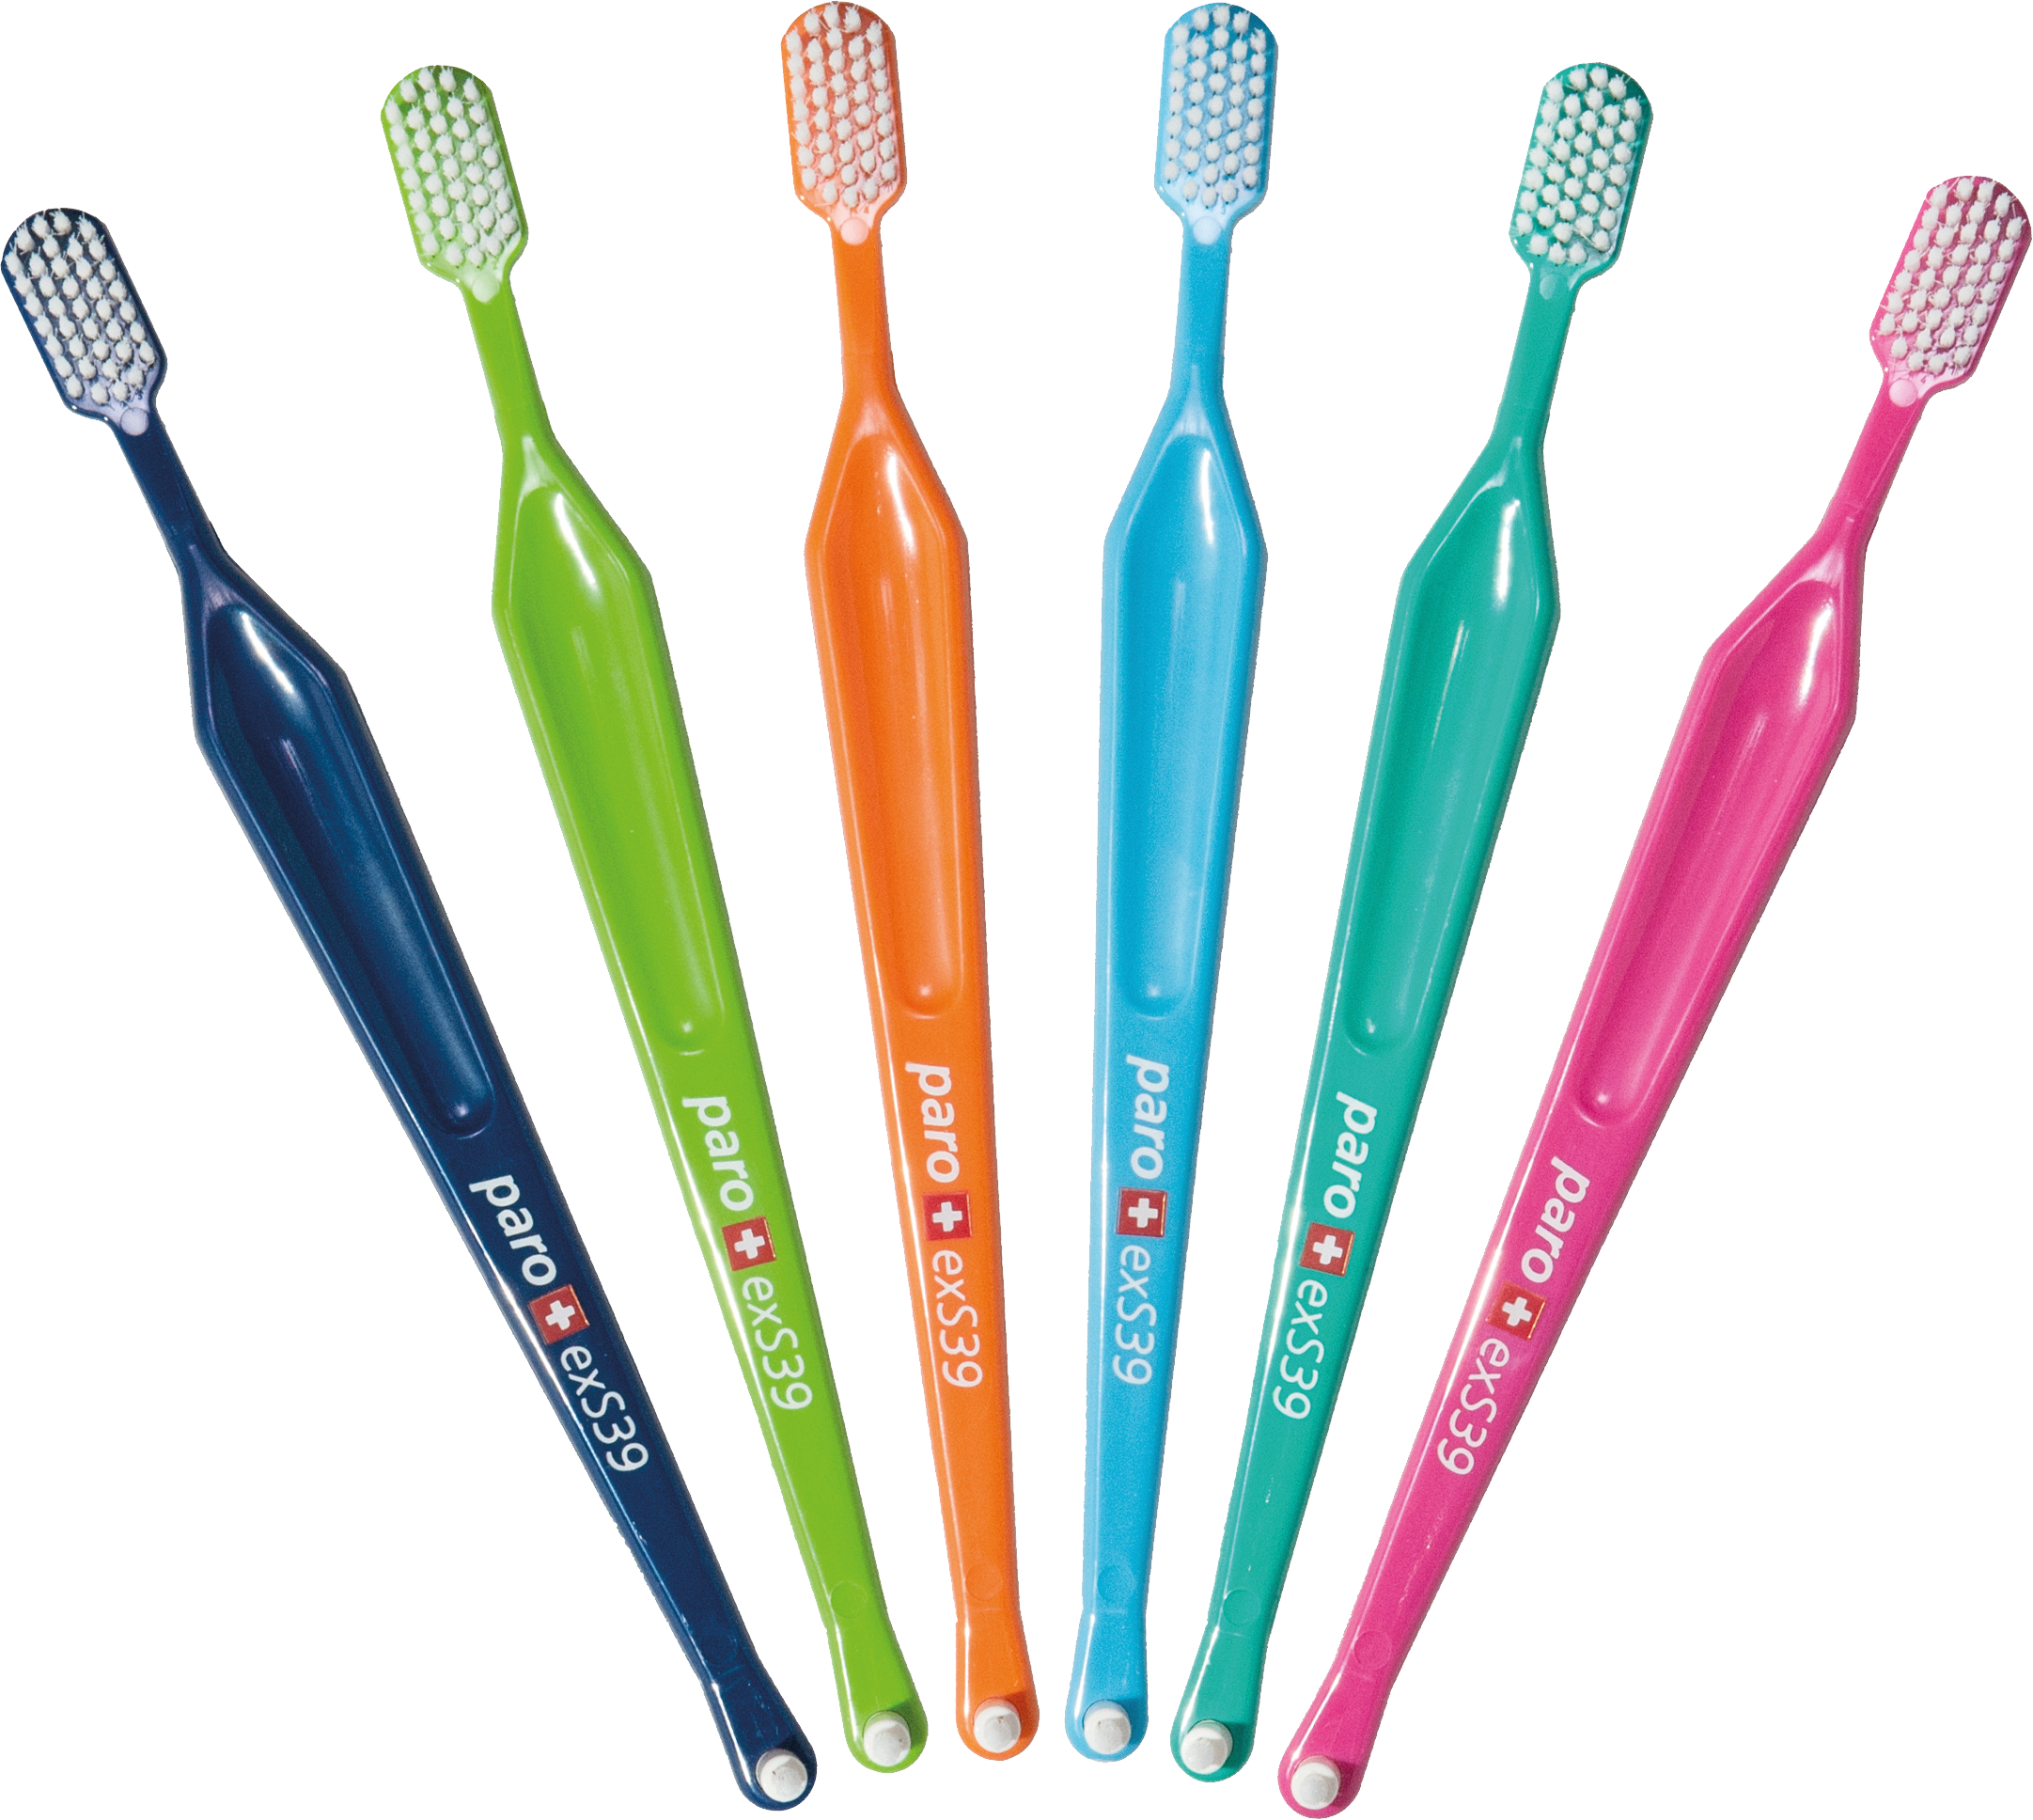 Six Tooth Brushes